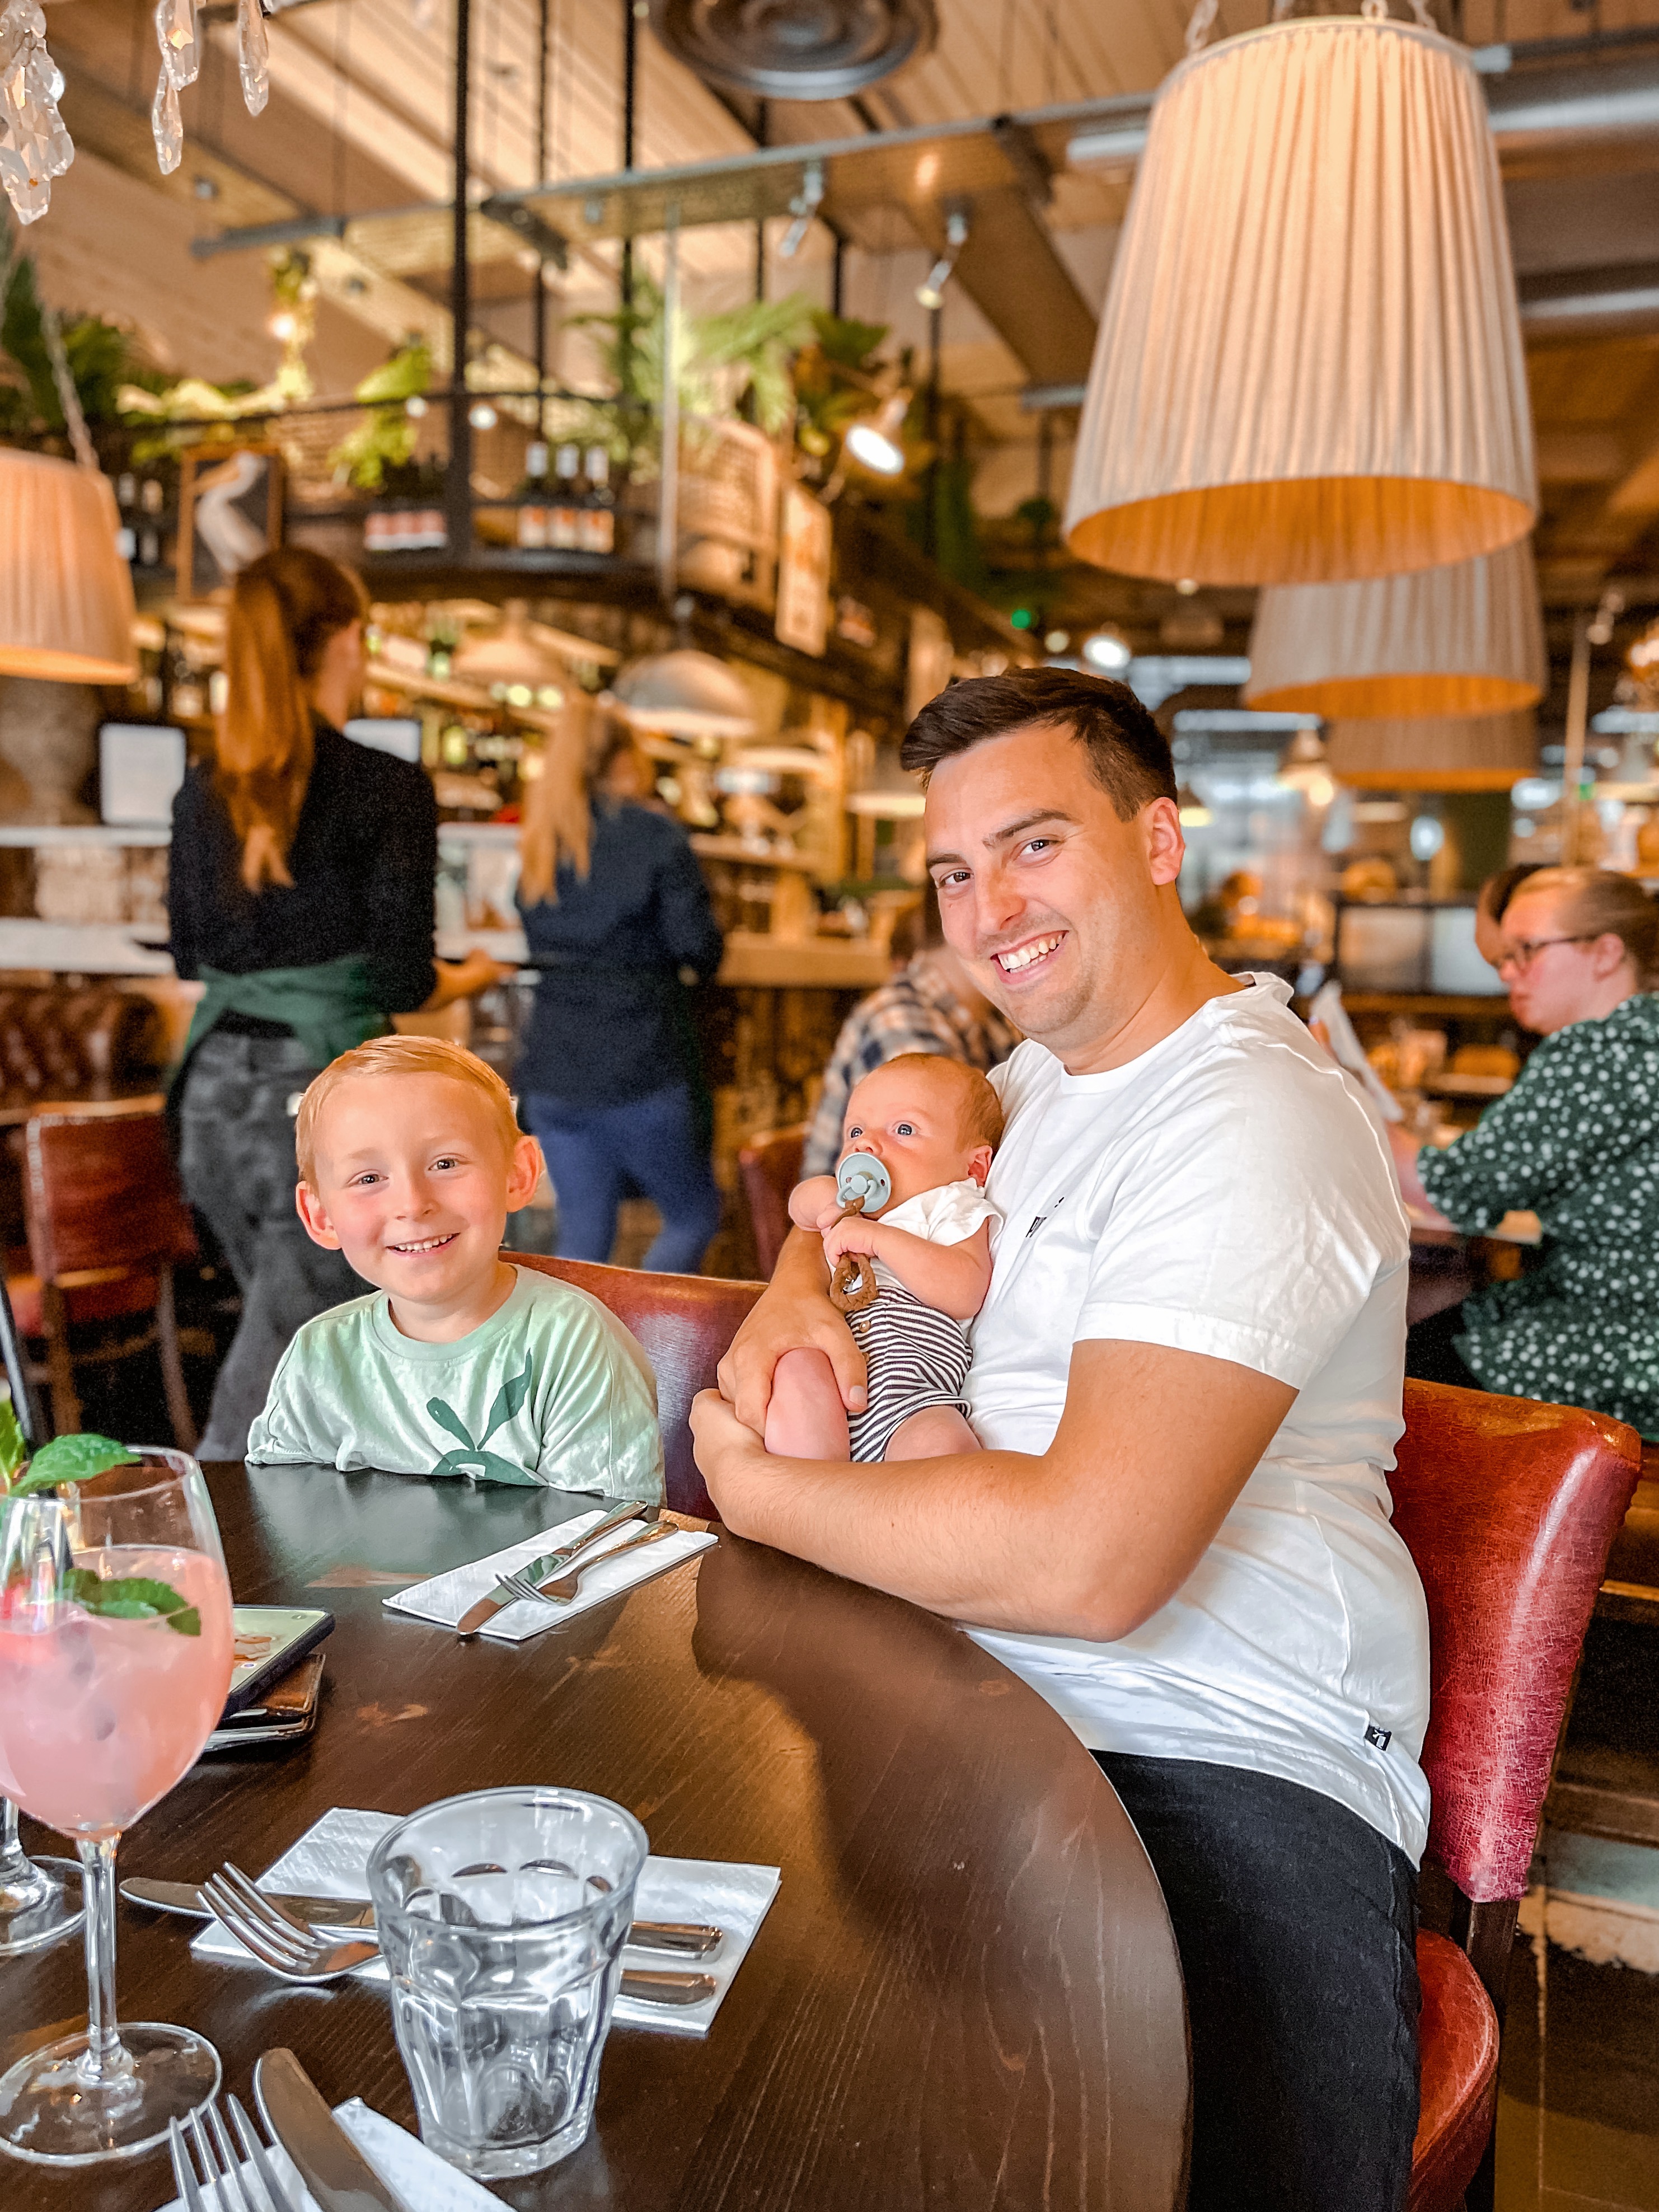 bills york restaurant review family friendly eating out